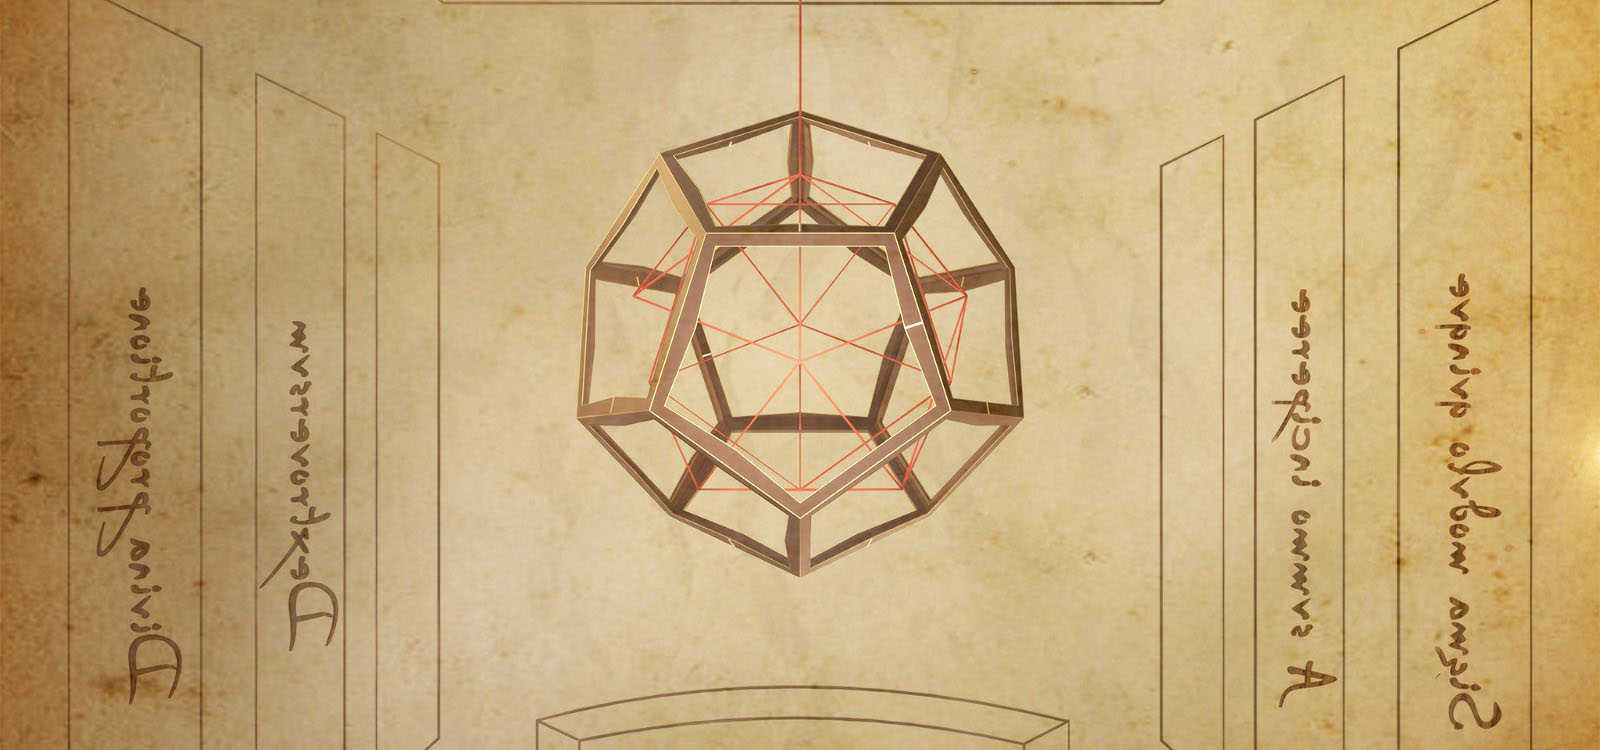 The coding artist Zd3N hid a private key in the image they have associated with Platonic geometry, golden ratio and philosophical considerations